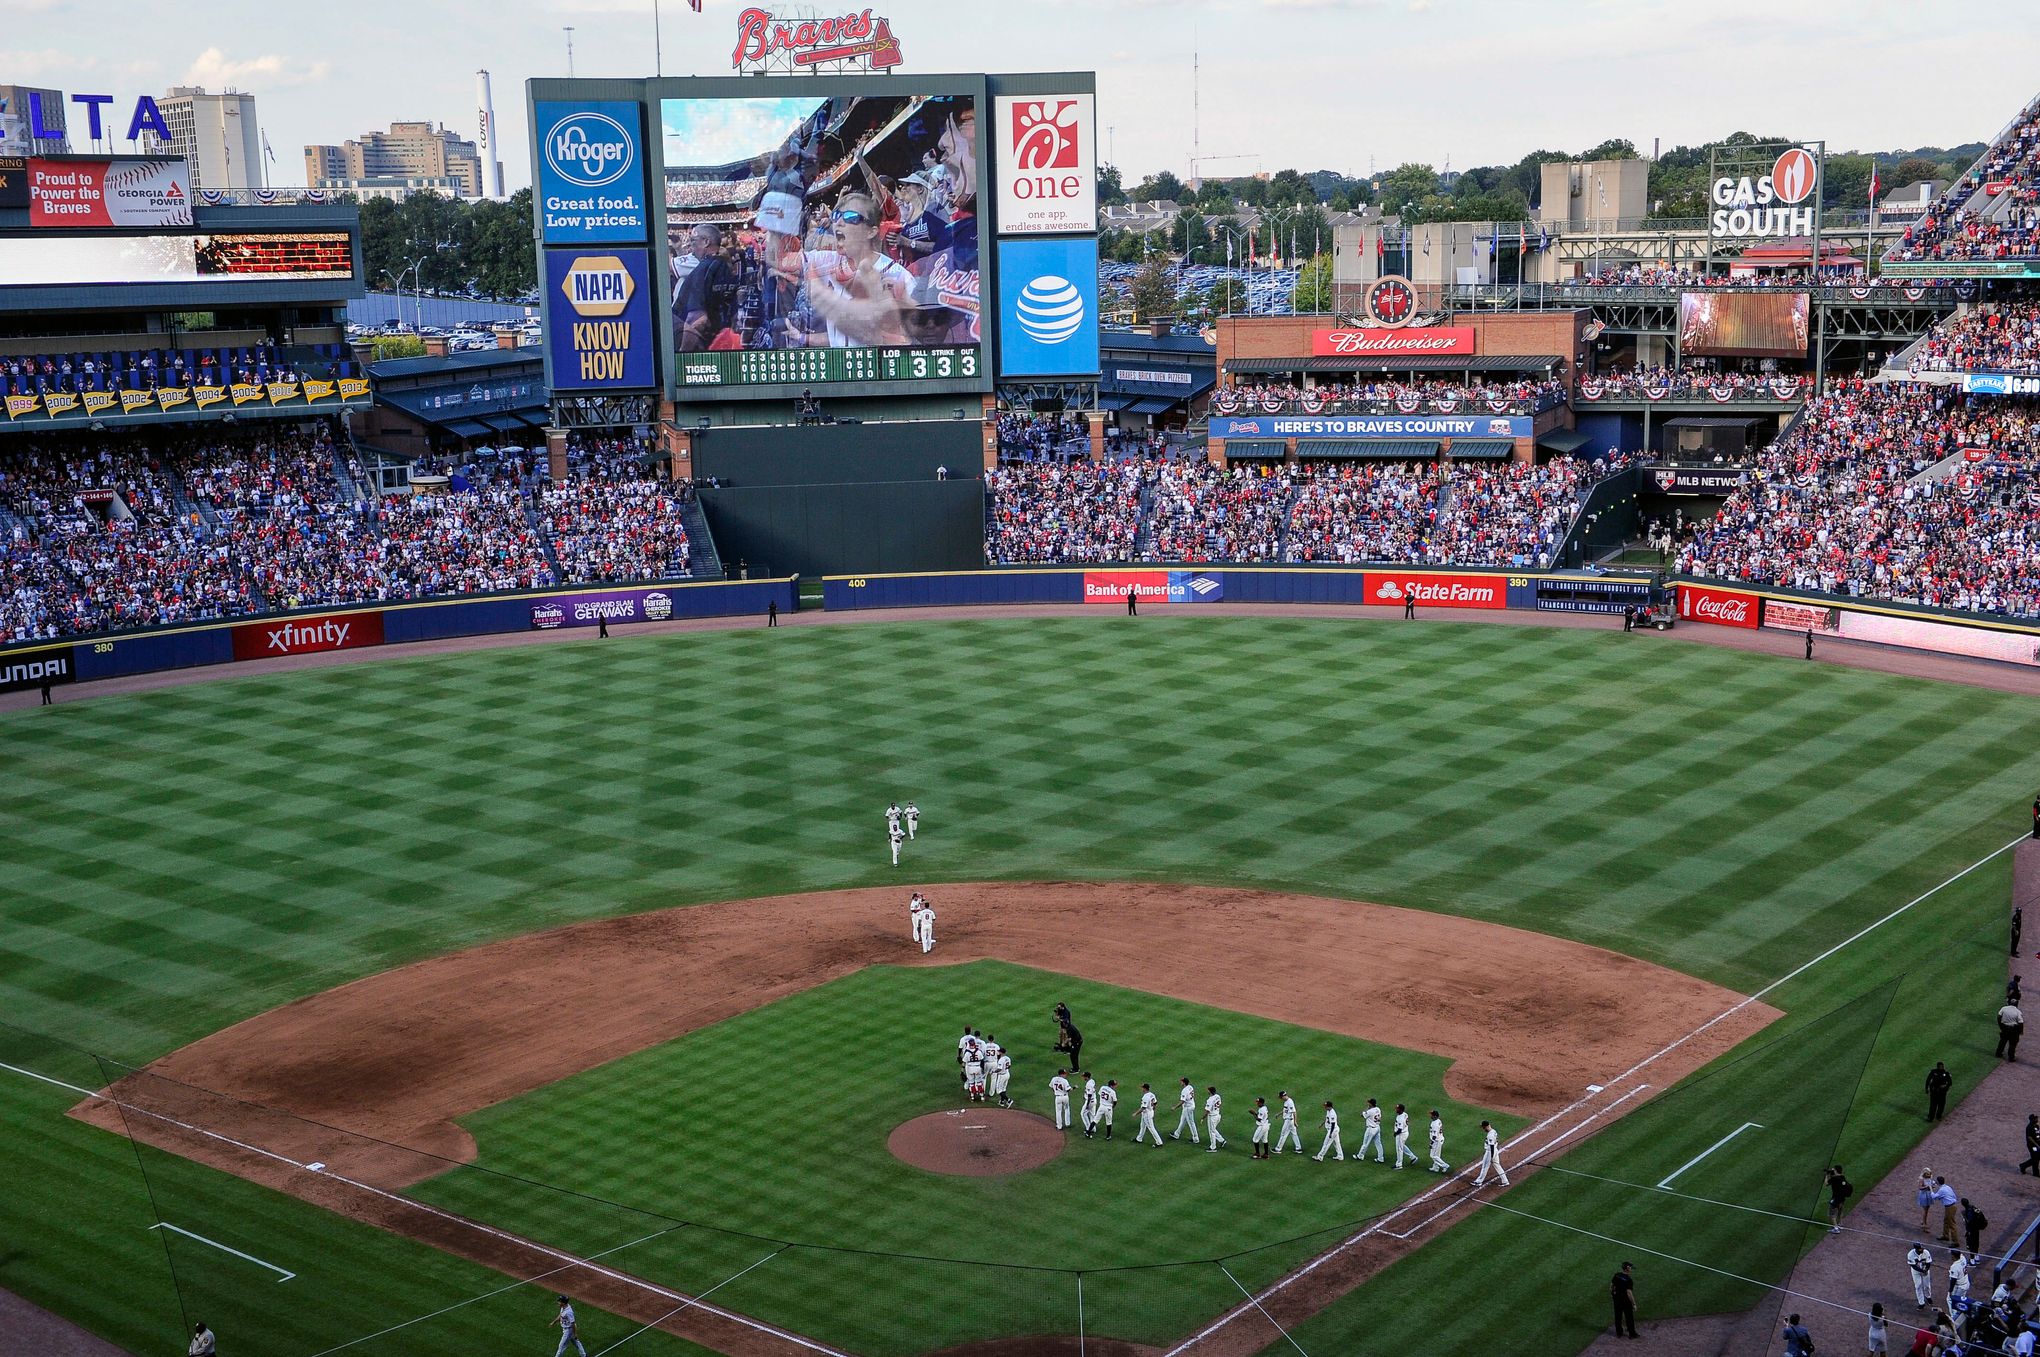 Braves give Turner Field a rousing send-off in final game